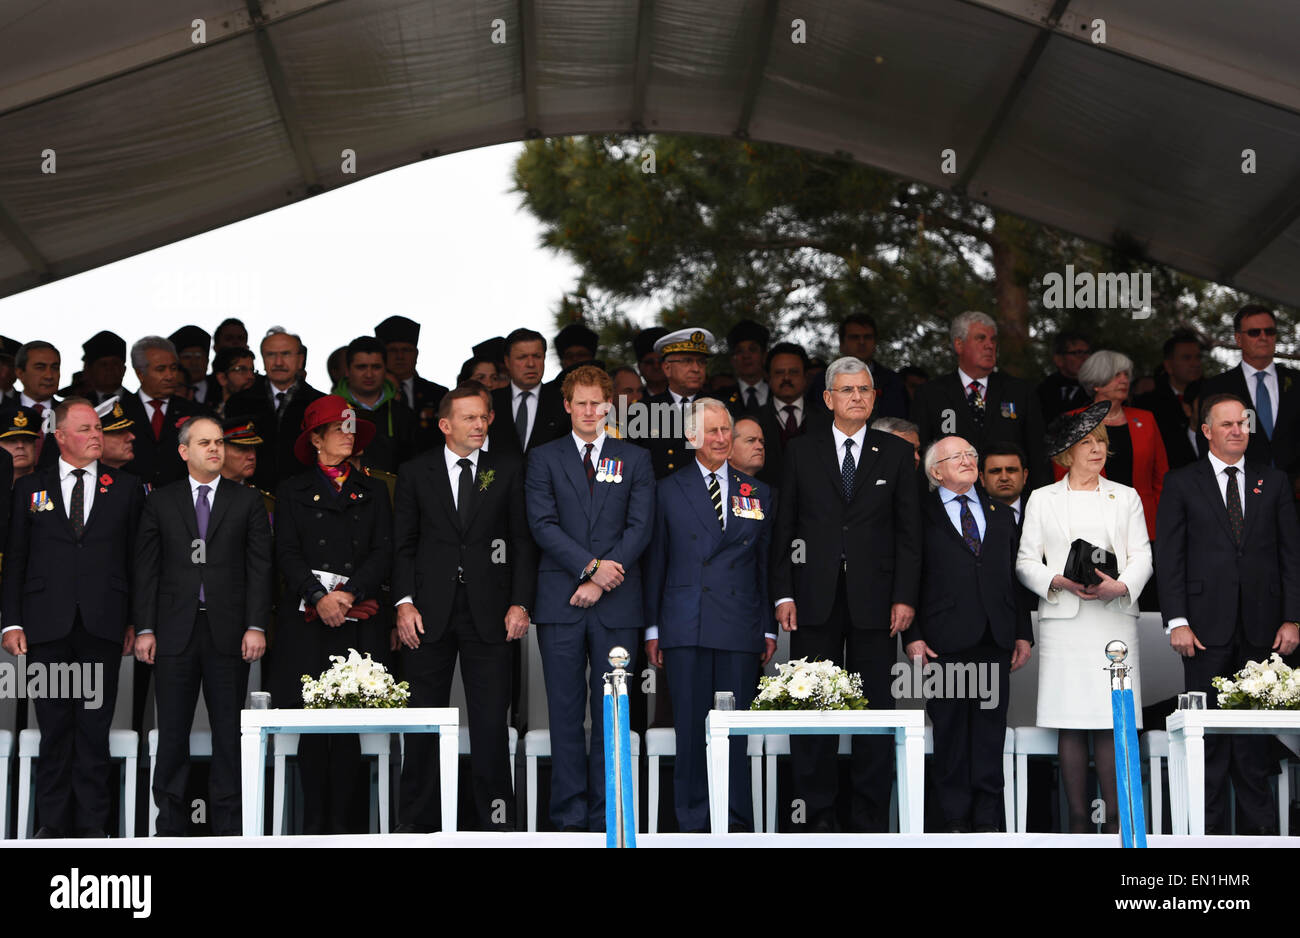 (150425) -- CANAKKALE, April 25, 2015(Xinhua) -- Attendants pay tribute to Mustafa Kemal Ataturk at Turkish memorial service in Canakkale, Turkey, April 25, 2015. Leaders and dignitaries from the UK, Ireland, Australia and New Zealand joined Turkish military delegates to attend Turkish memorial service on Saturday at the 57th Infantry Regiment Memorial, as an event of 100th anniversary of the Gallipoli Battle. (Xinhua/He Canling) Stock Photo